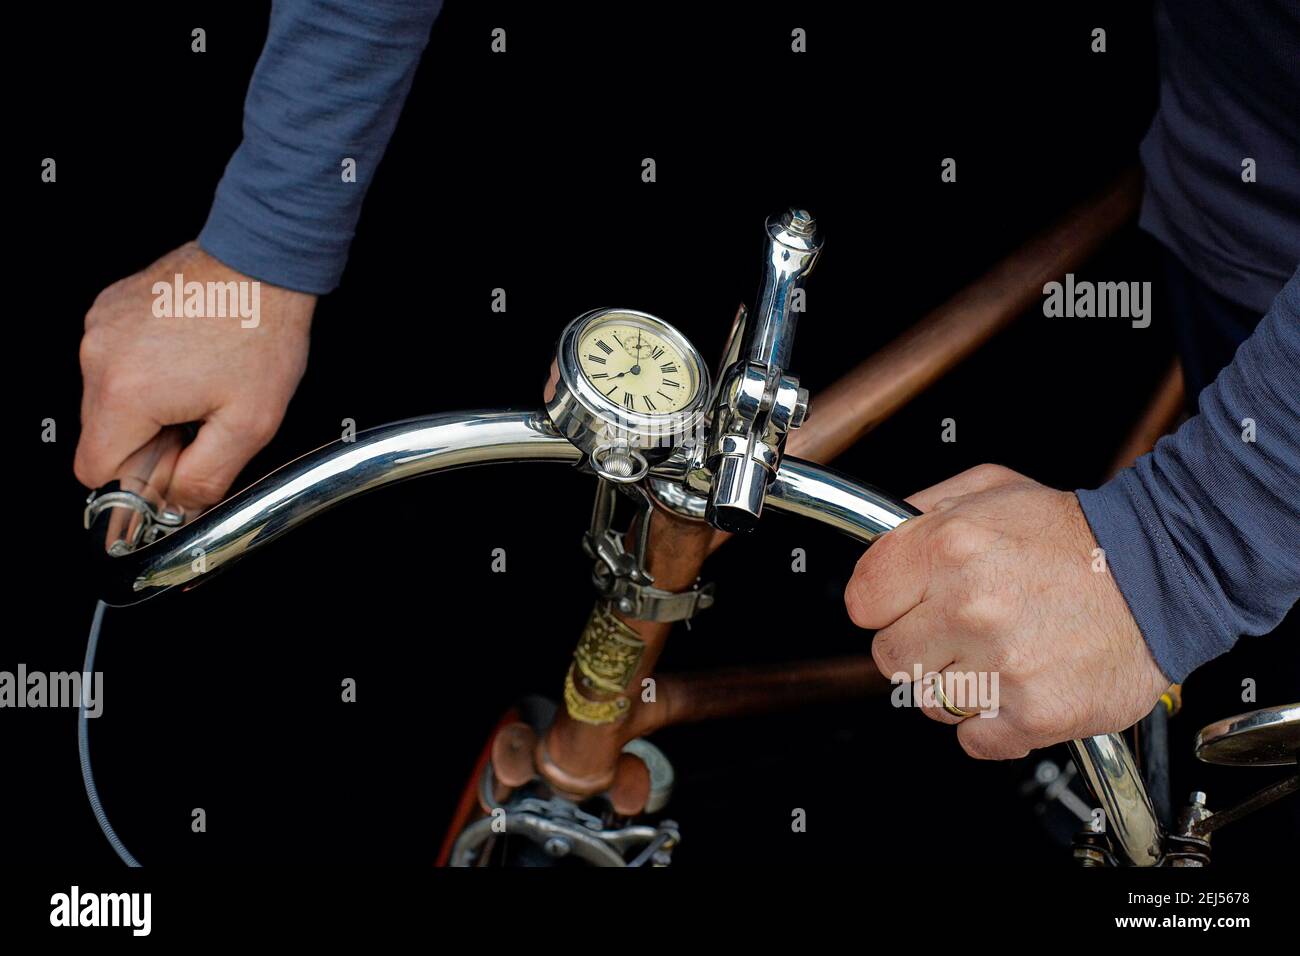 Rene a La Greve Tour De France 1920 fixed wheel bicycle out of gleaming copper.Hands of a man holding handlebars on vintage bicycle. Stock Photo